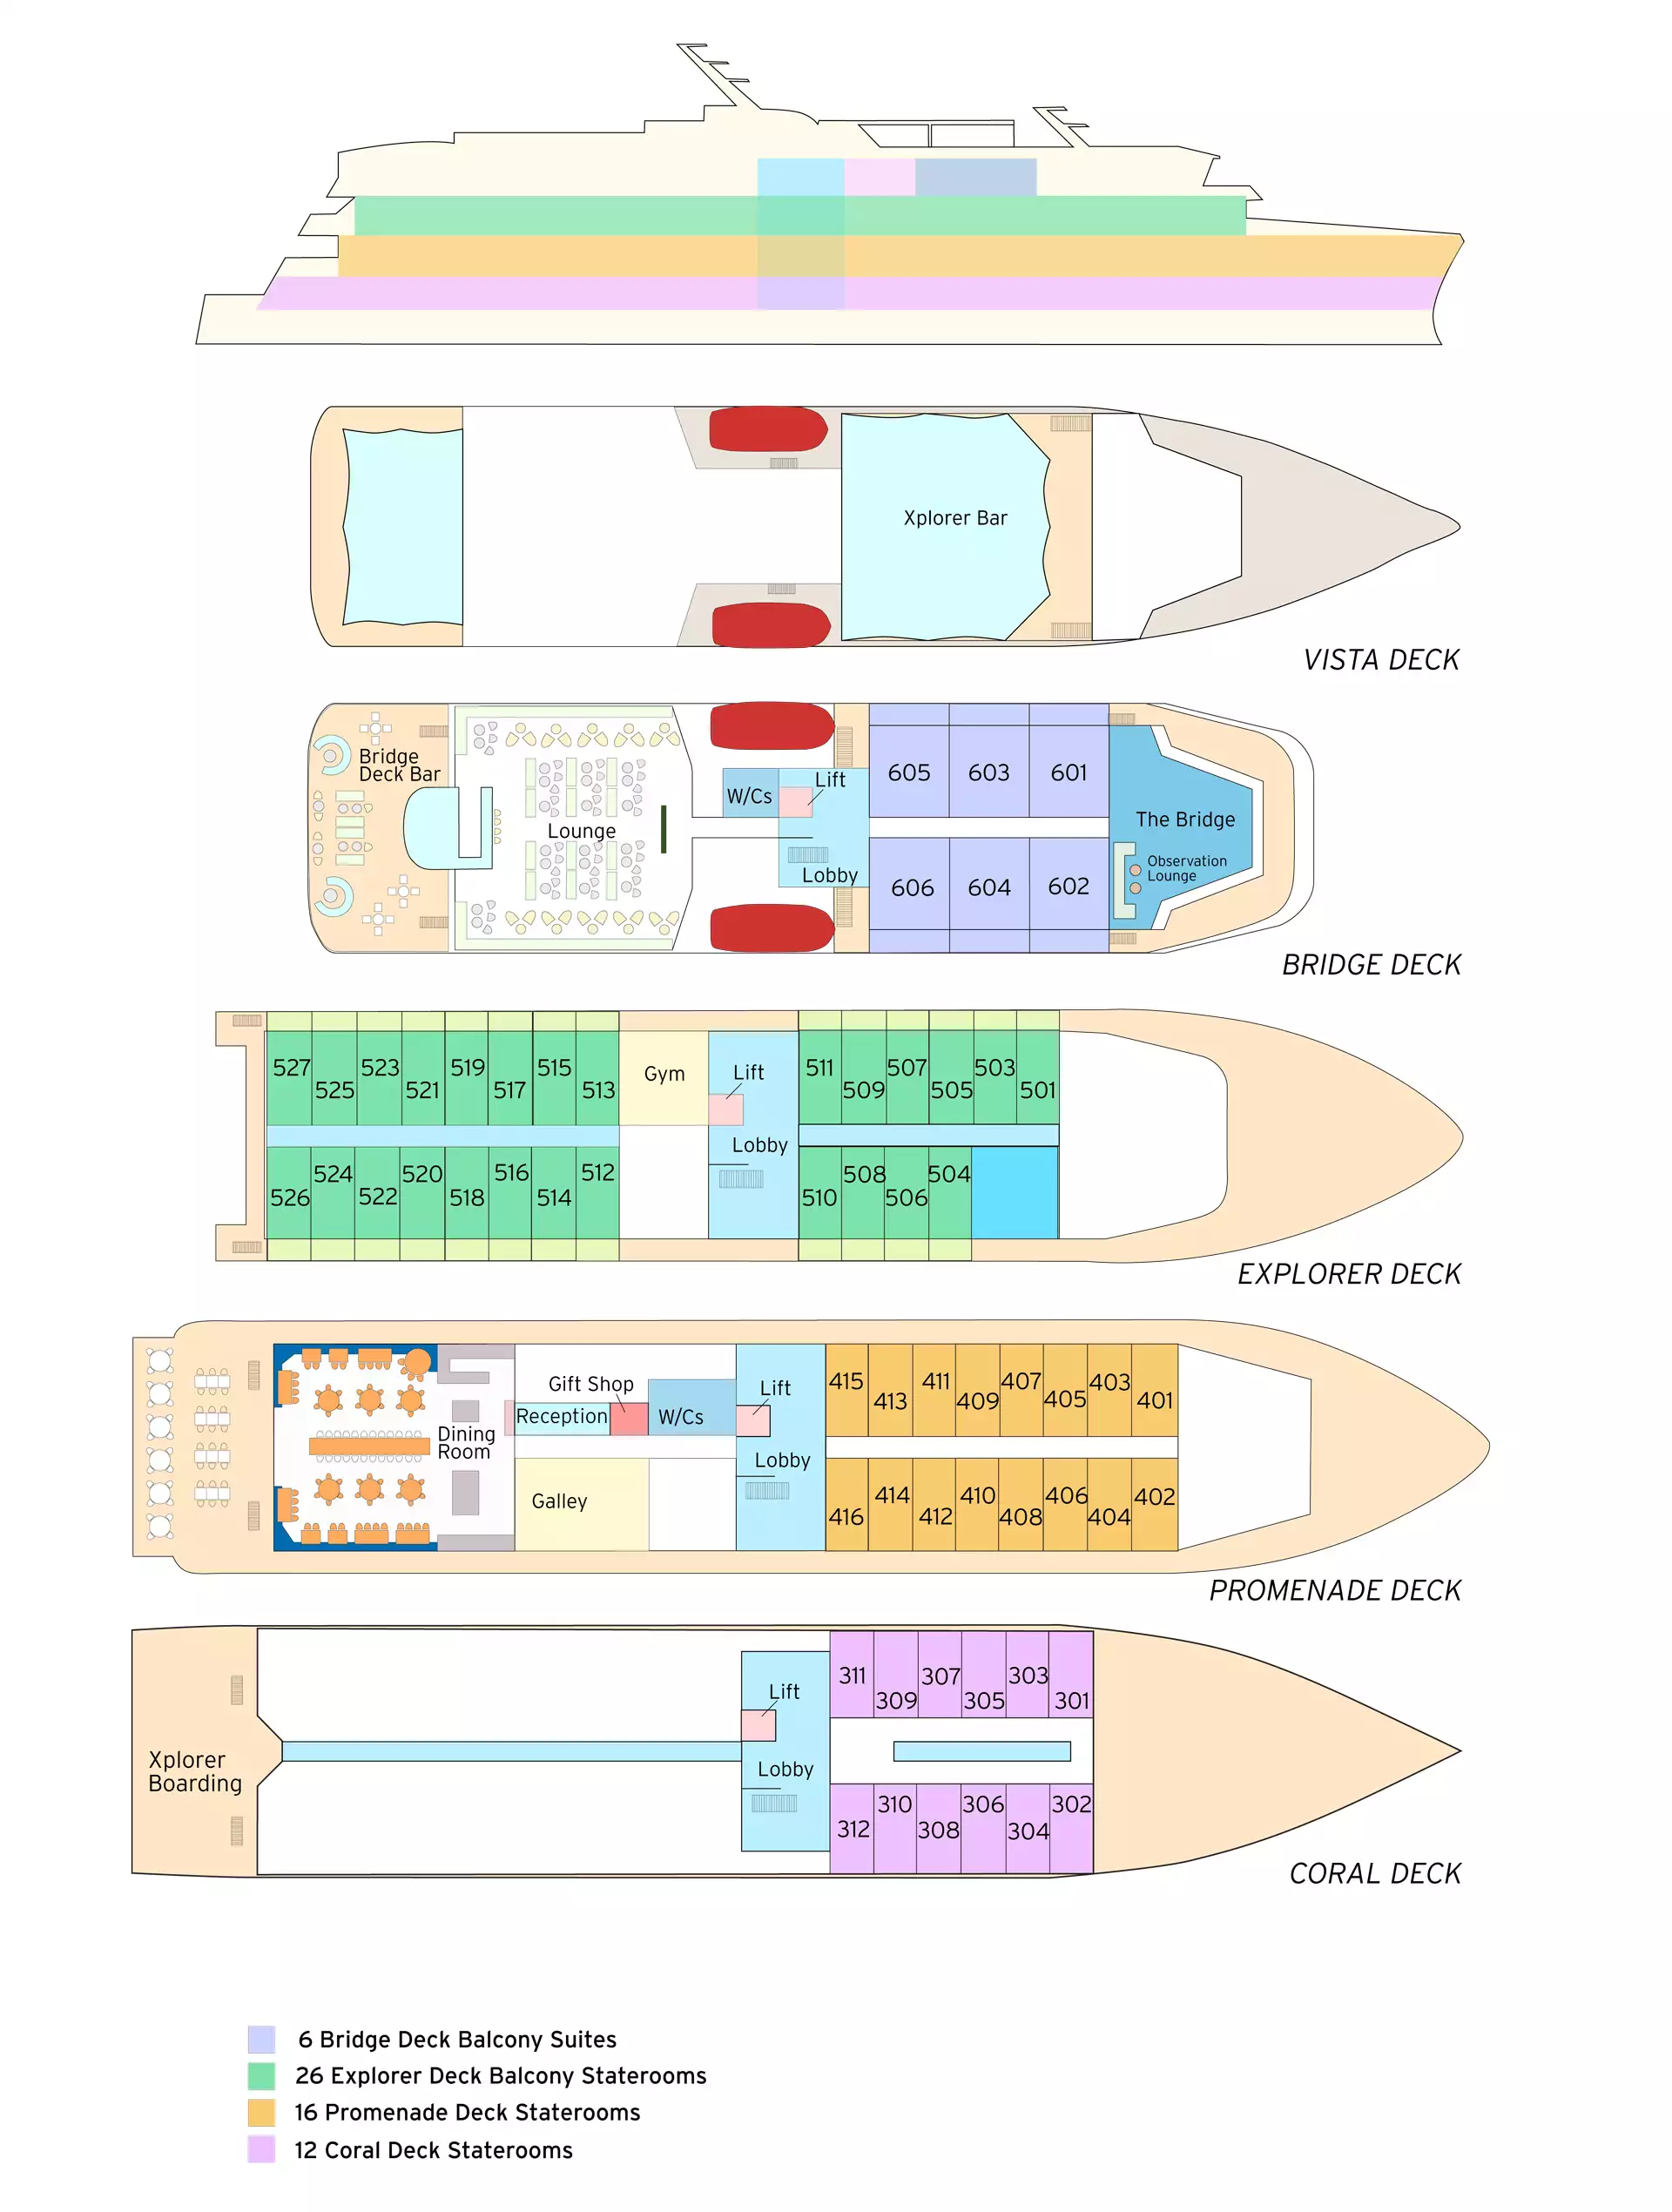 Deck plan of Coral Geographer small ship showing 5 decks & cabins for 120 passengers.